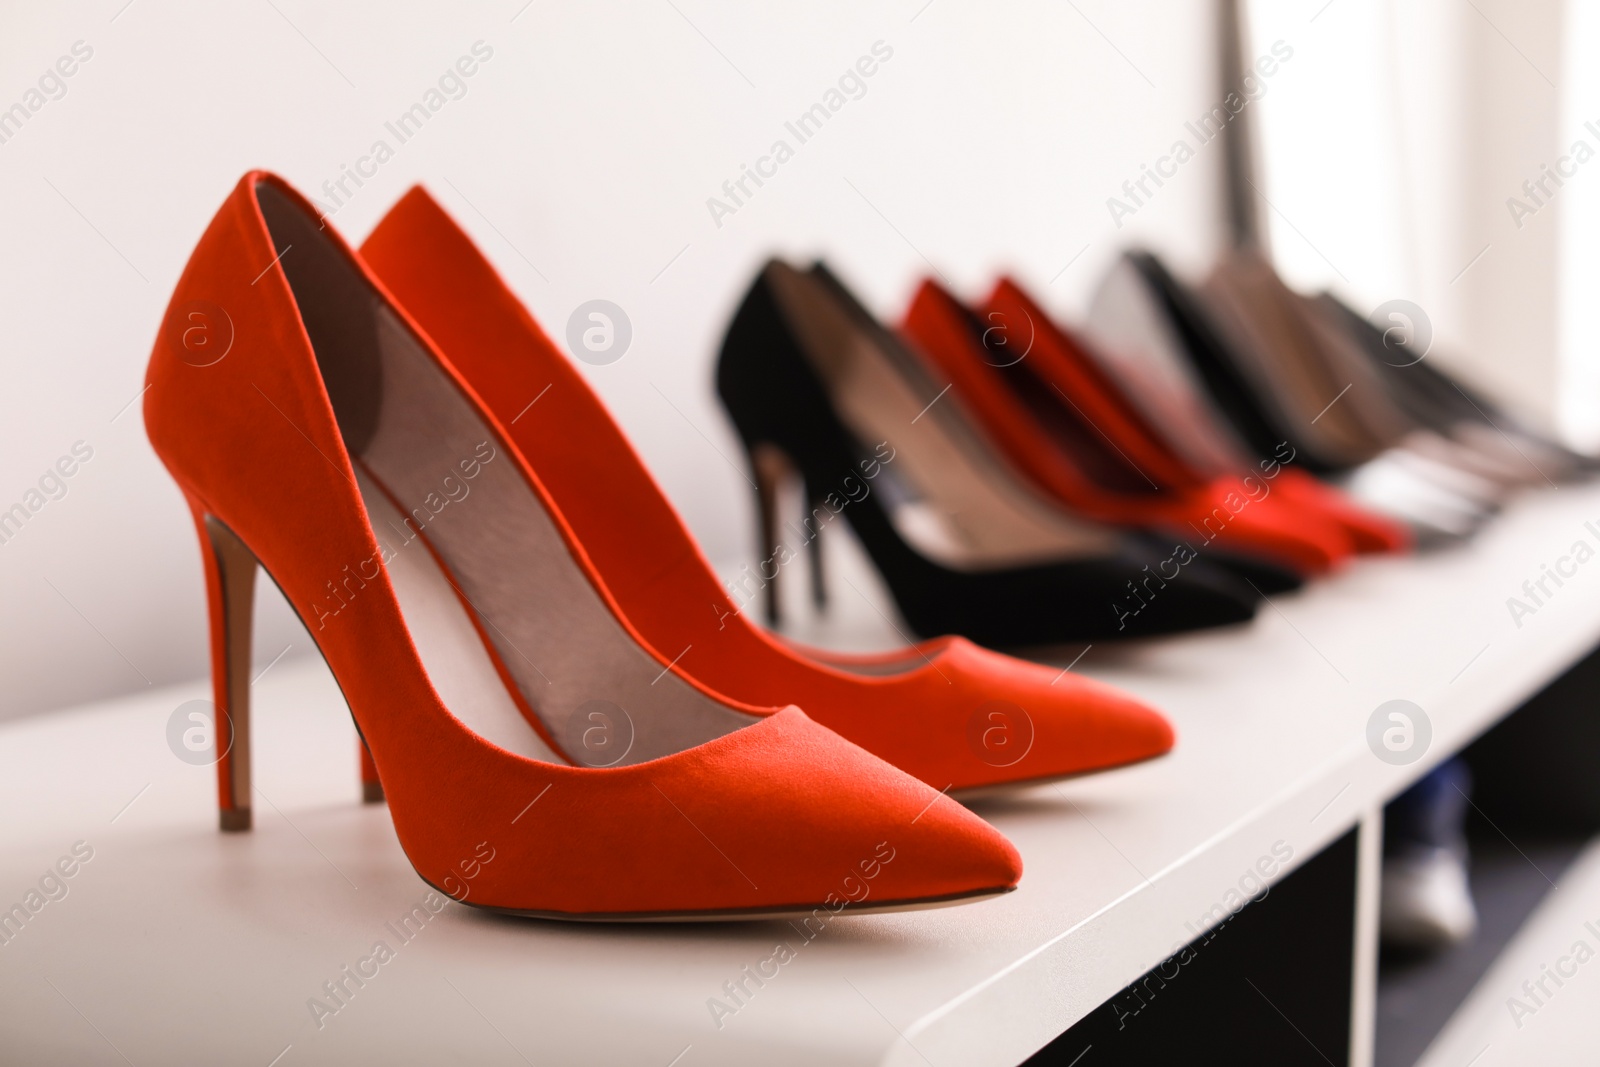 Photo of High heeled shoes on shelf in store